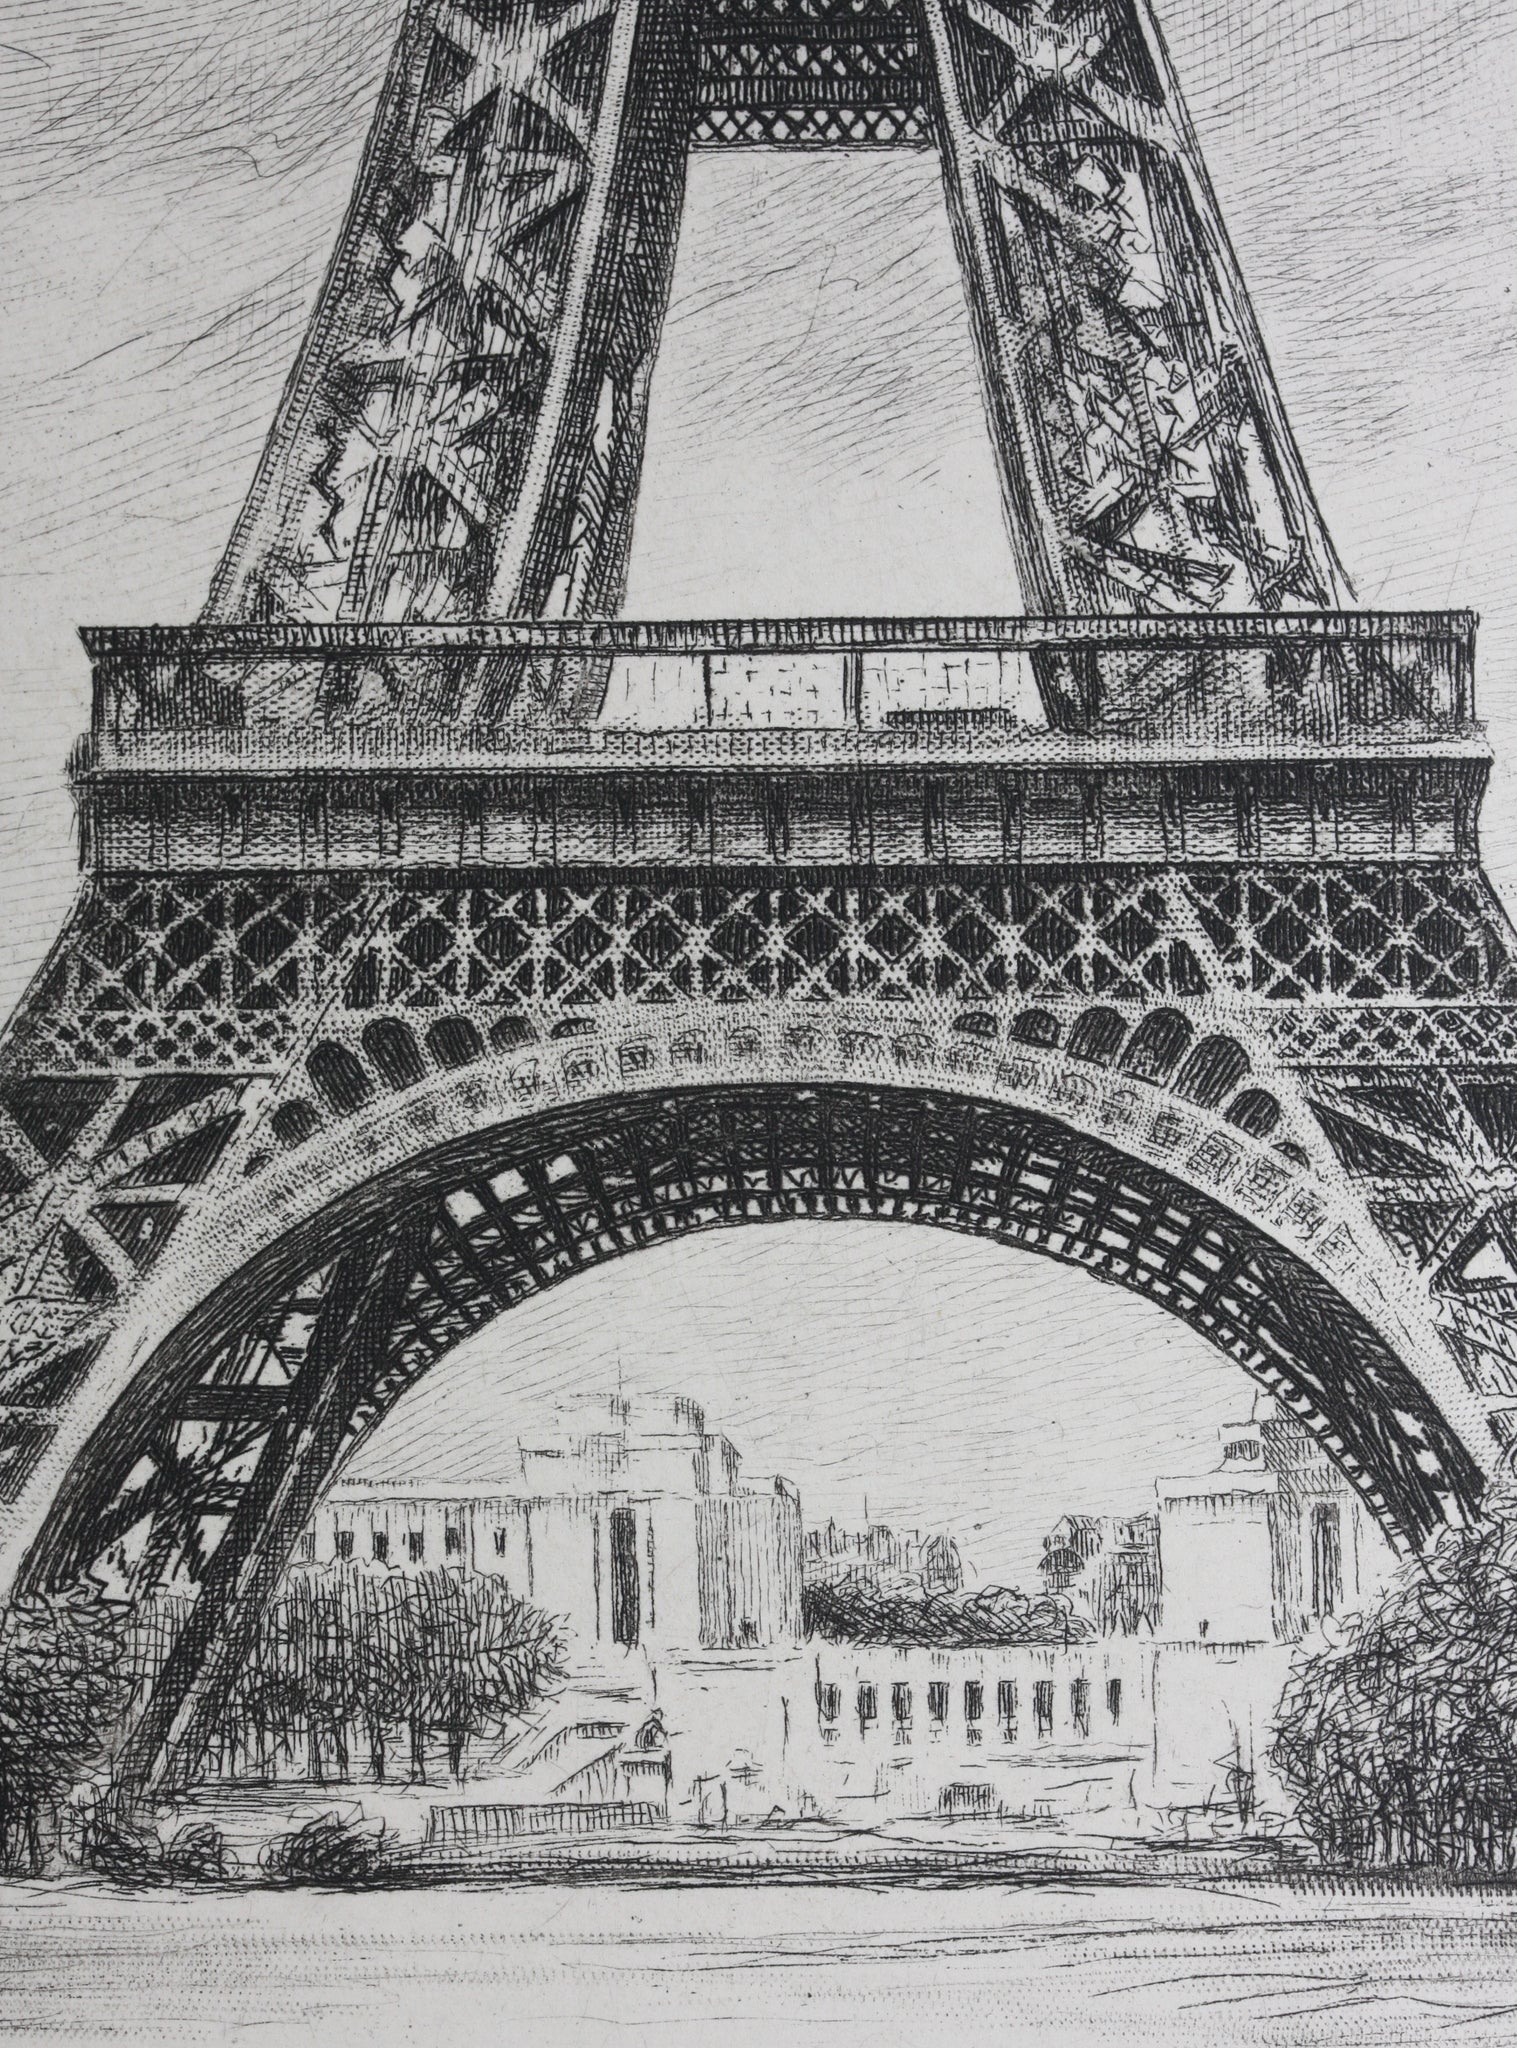 How To Paint An Eiffel Tower - Step By Step Painting With Tracie Kiernan